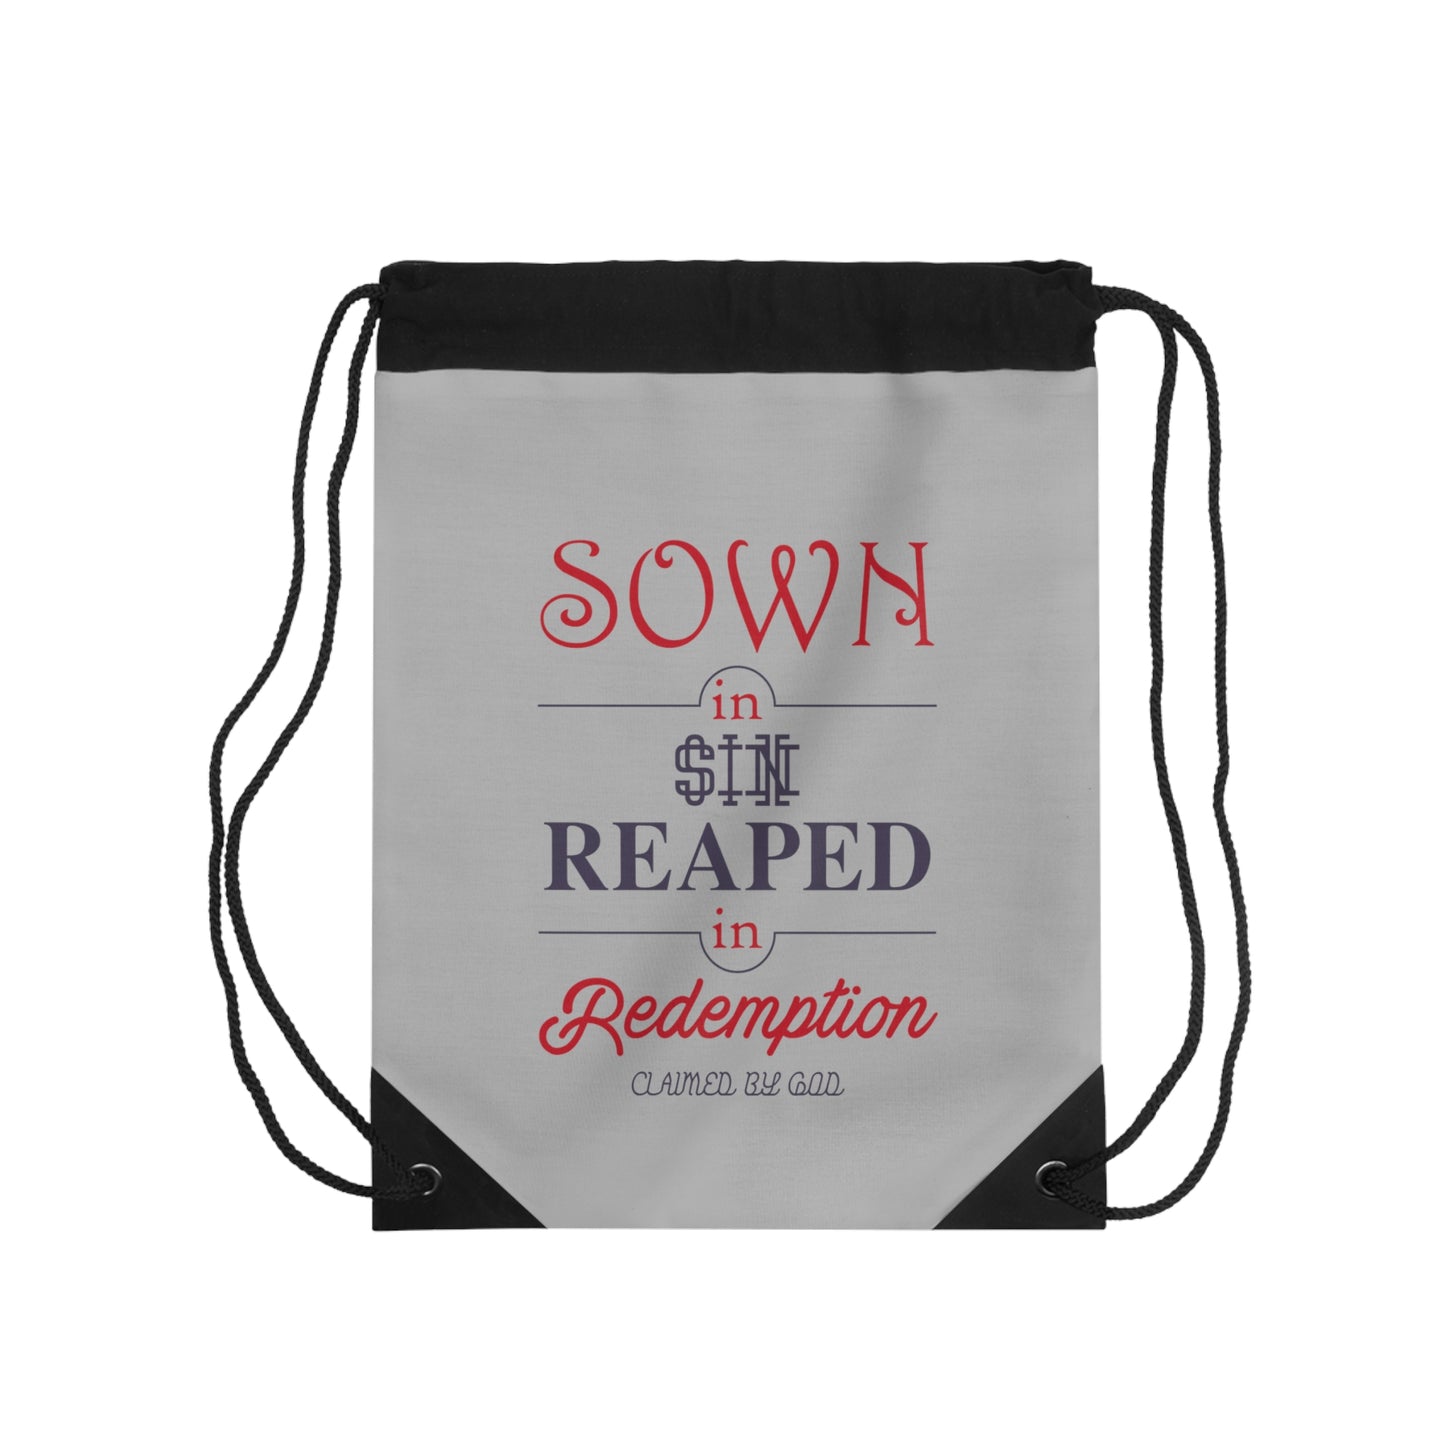 Sown In Sin Reaped In Redemption Drawstring Bag